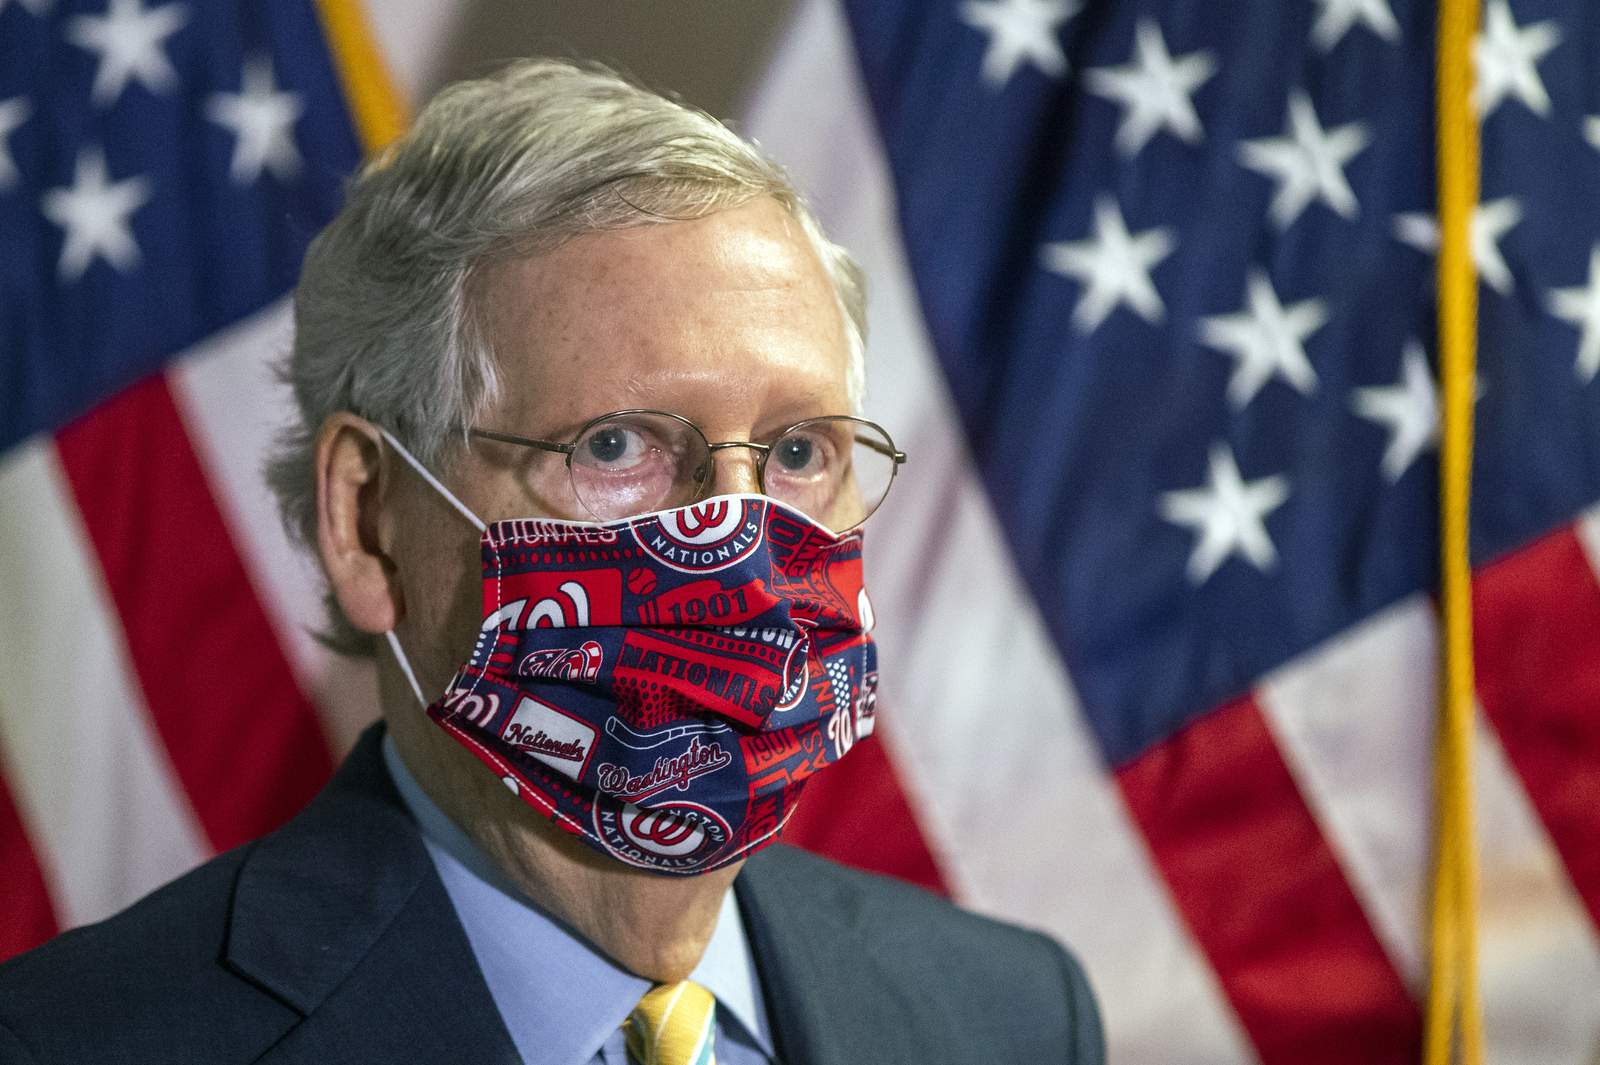 Republicans, with exception of Trump, now push mask-wearing